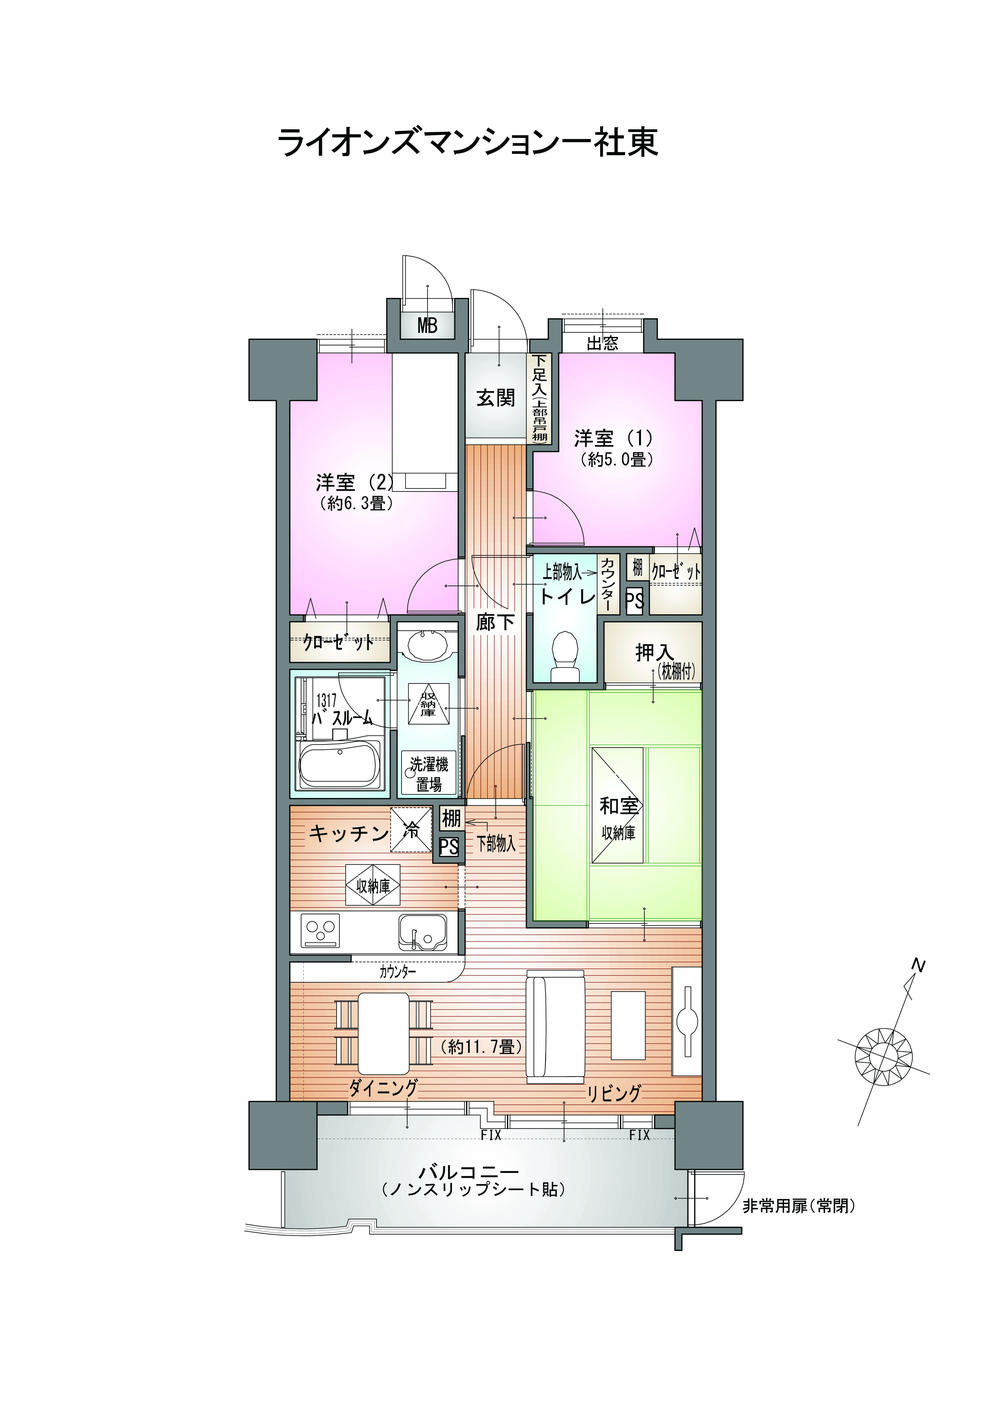 Floor plan. 3LDK, Price 20.8 million yen, Occupied area 70.54 sq m , Balcony area 8.96 sq m kitchenese-style room, Each basin field is equipped with under-floor storage.